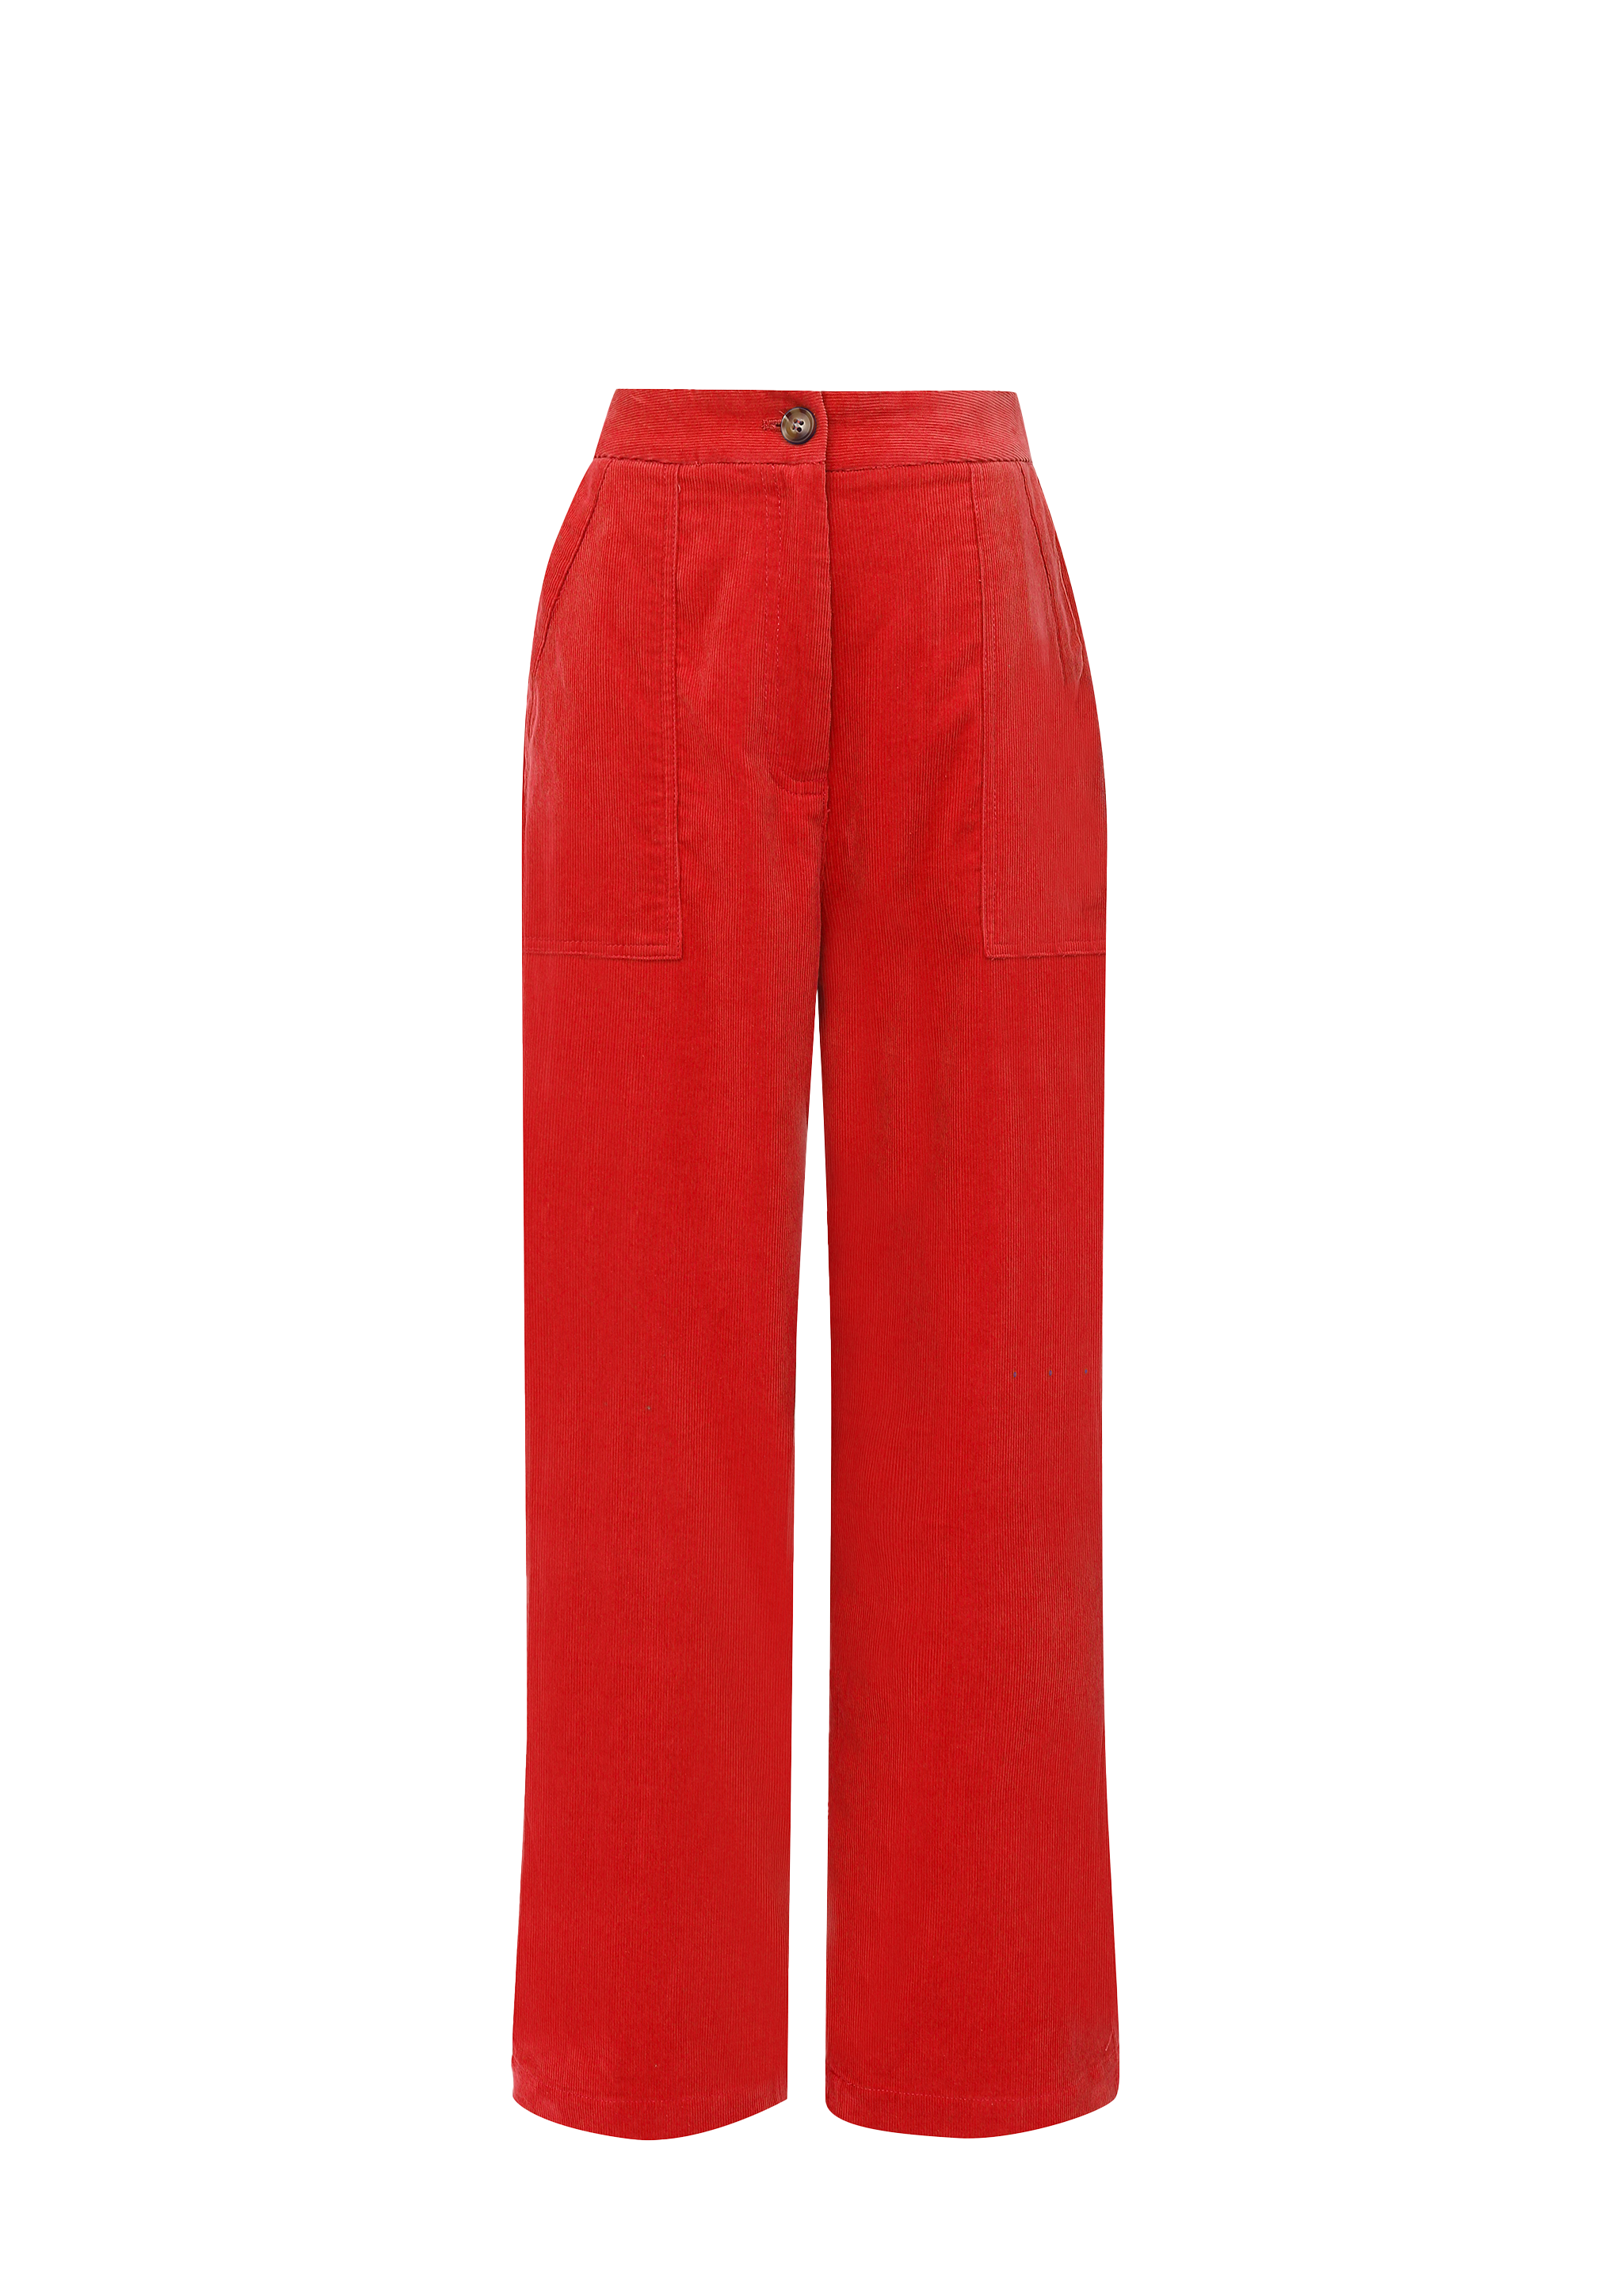 PELLY Pants Red